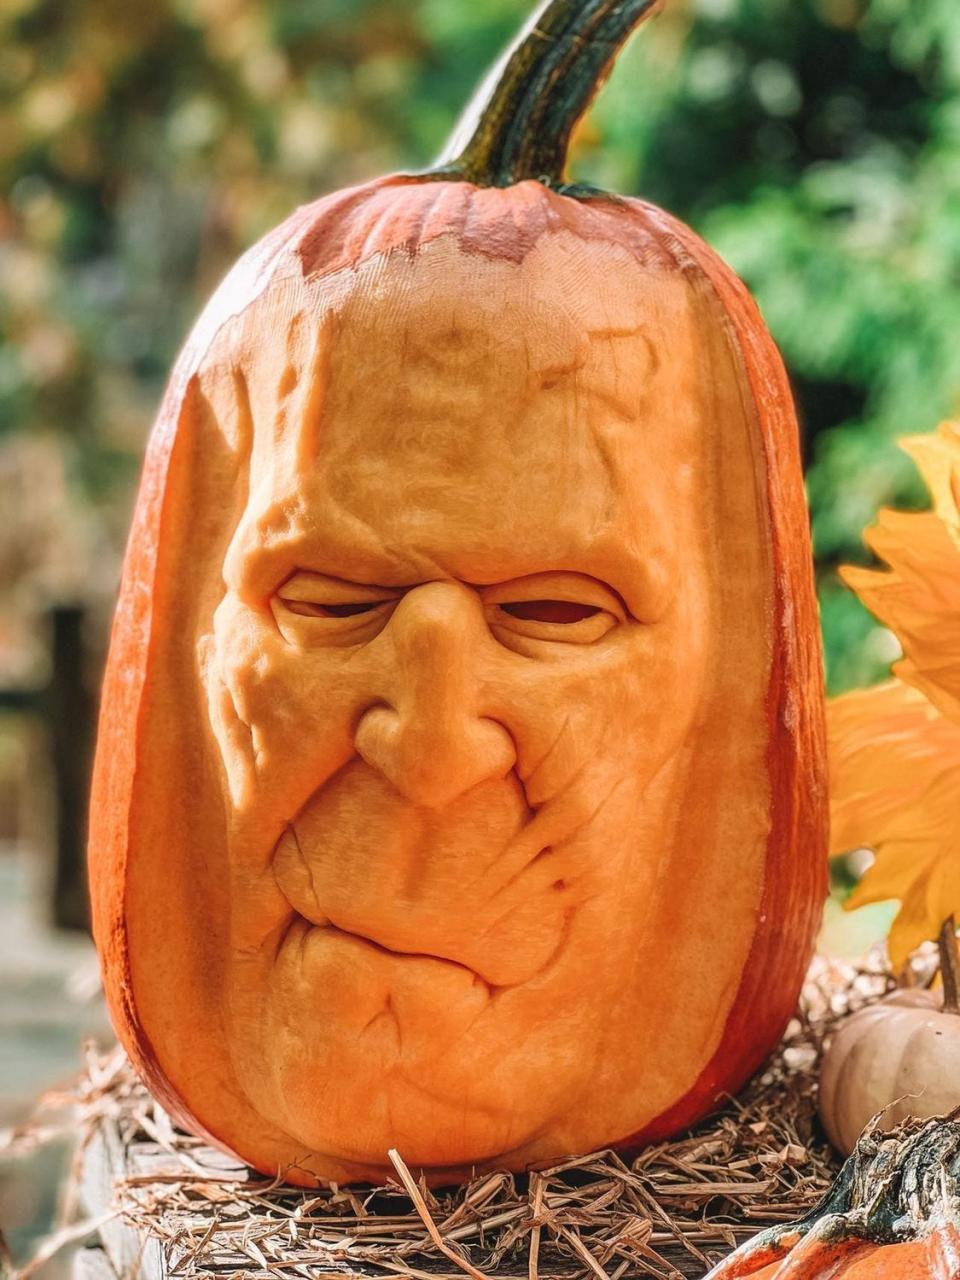 One of the creations of Adam Bierton, a Rochester, New York based professional pumpkin carver and restaurant owner.